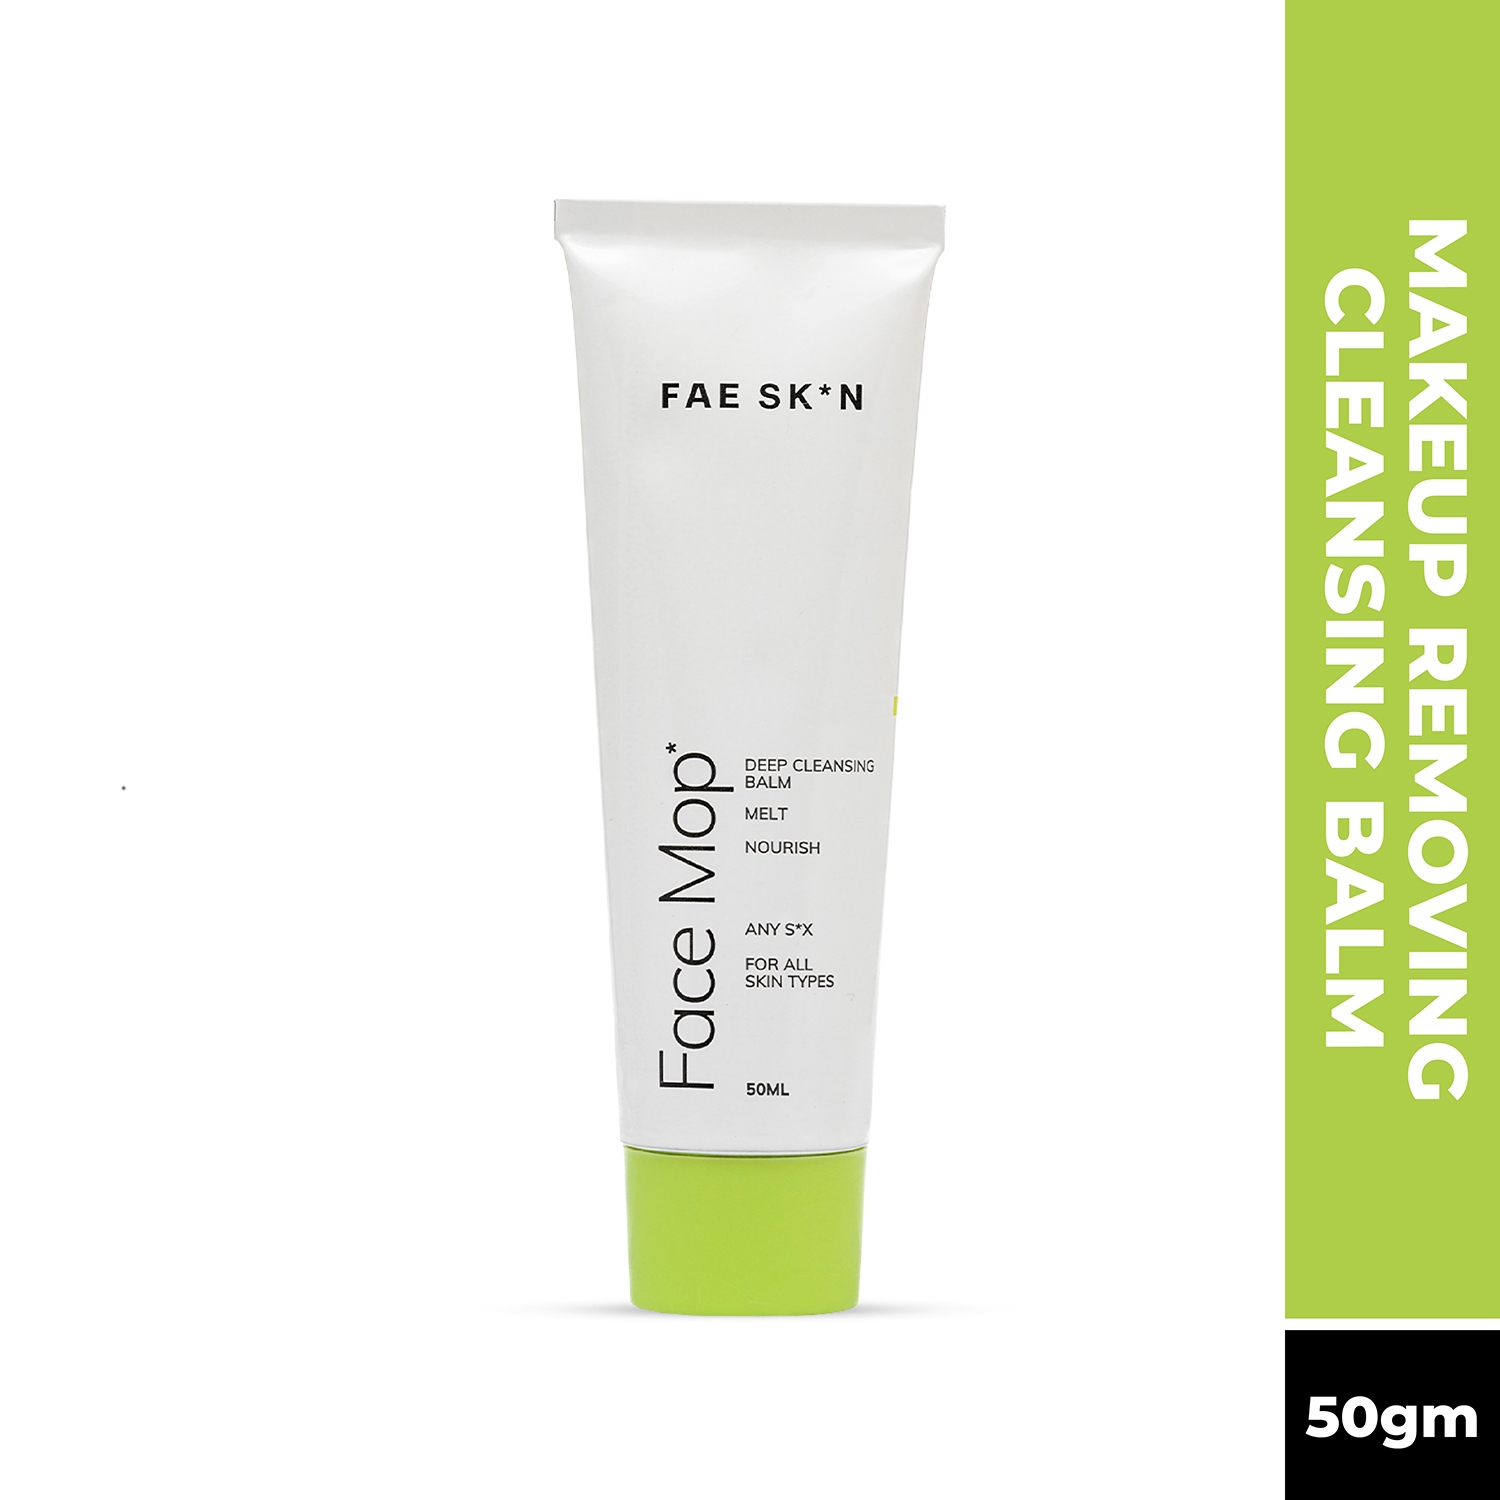 FAE BEAUTY | FAE BEAUTY Face Mop - Makeup Removing Cleansing Balm (50g)